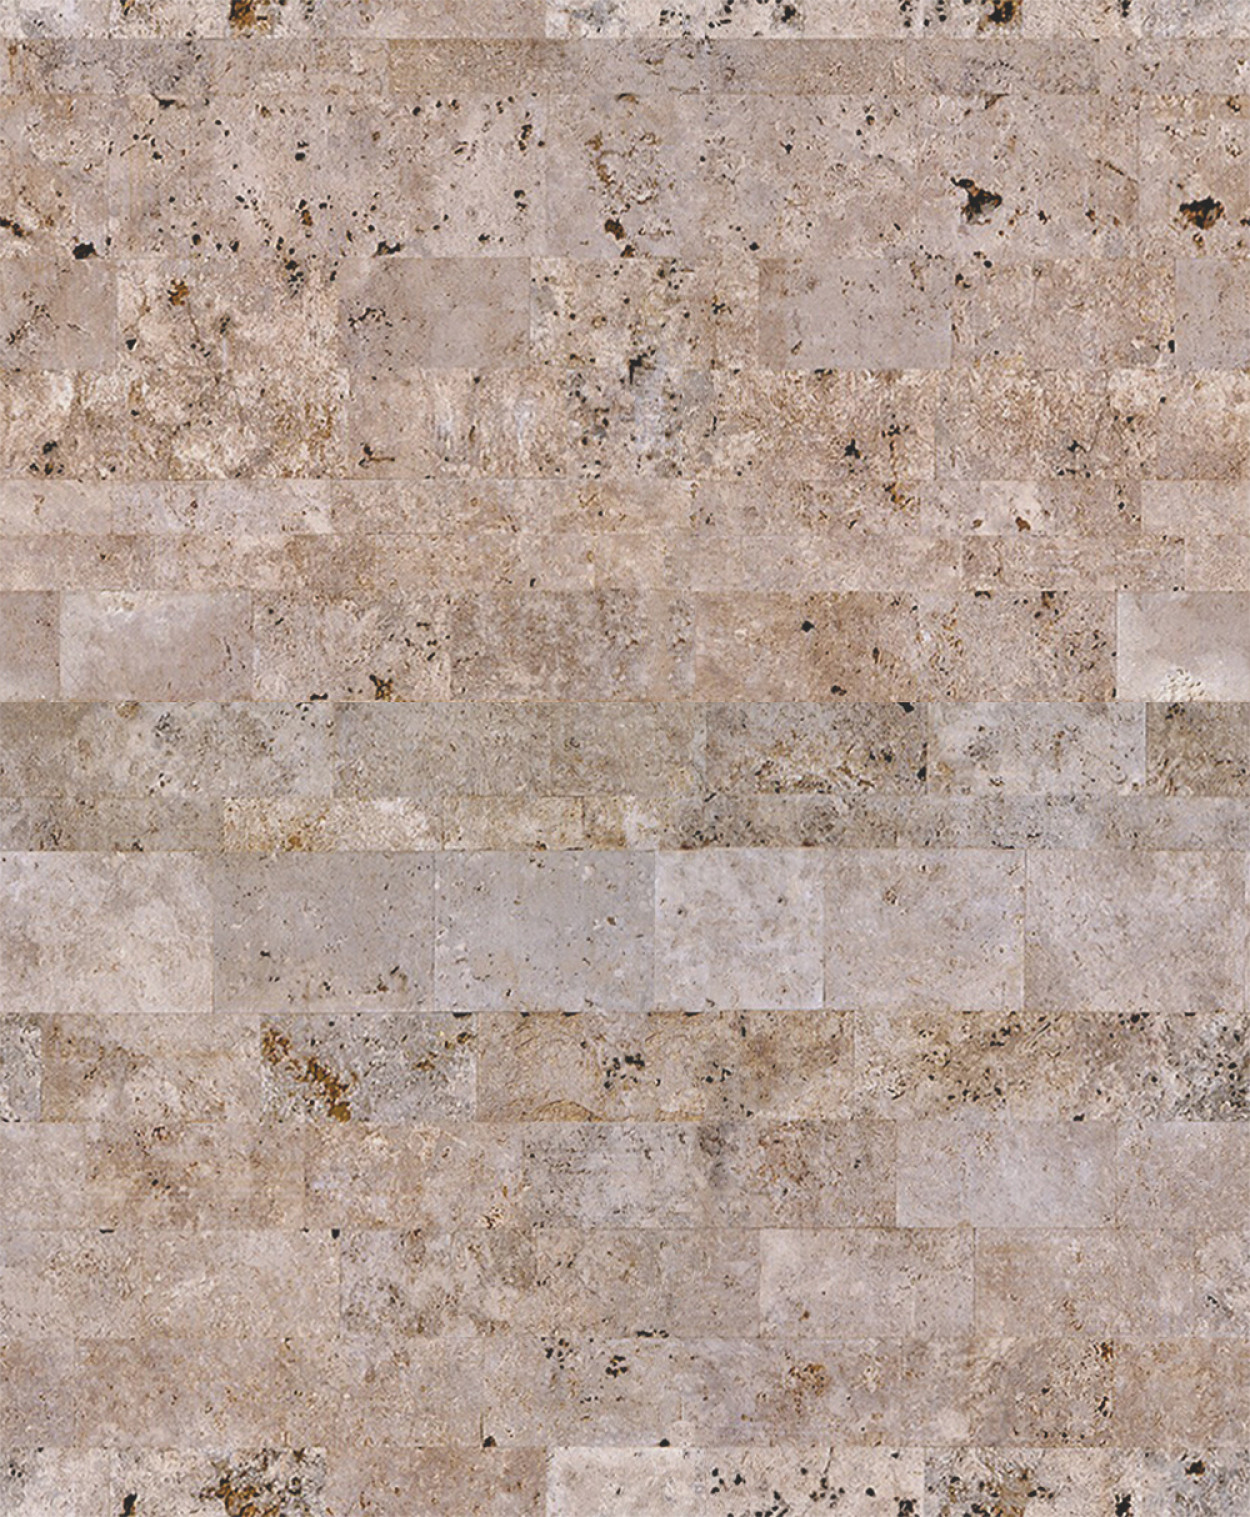 A seamless stone wall (cadiz) texture for use in architectural drawings and 3D models